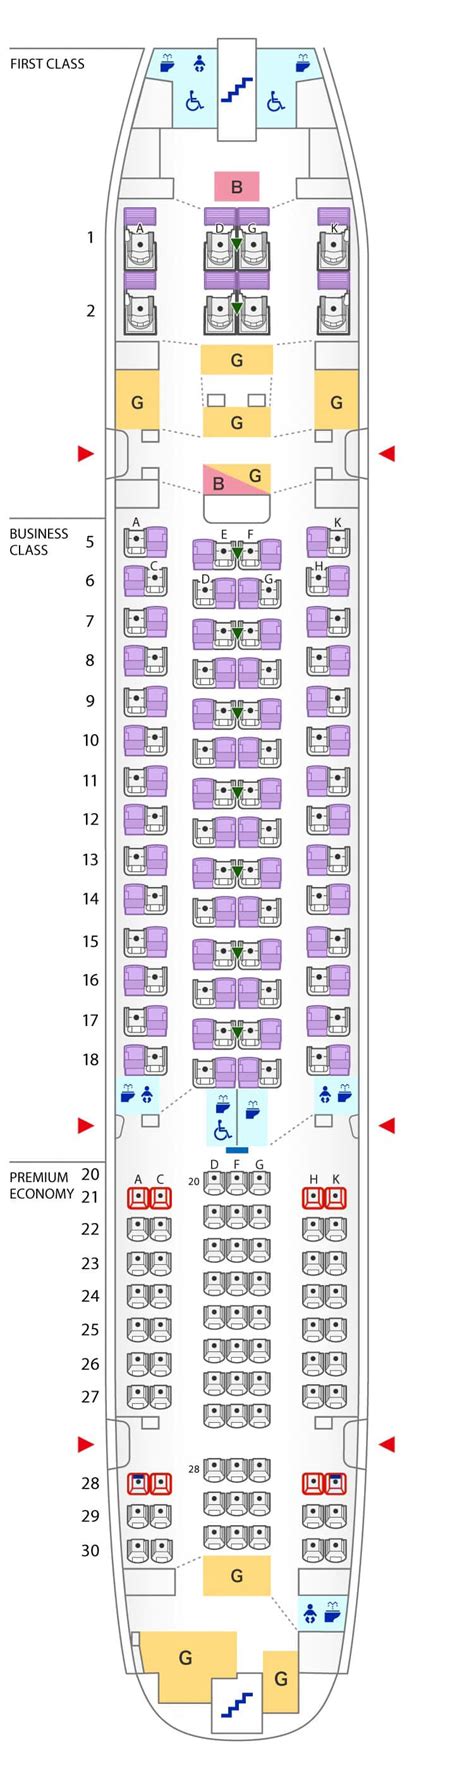 Seat Map Of Emirates A380 800 Image To U